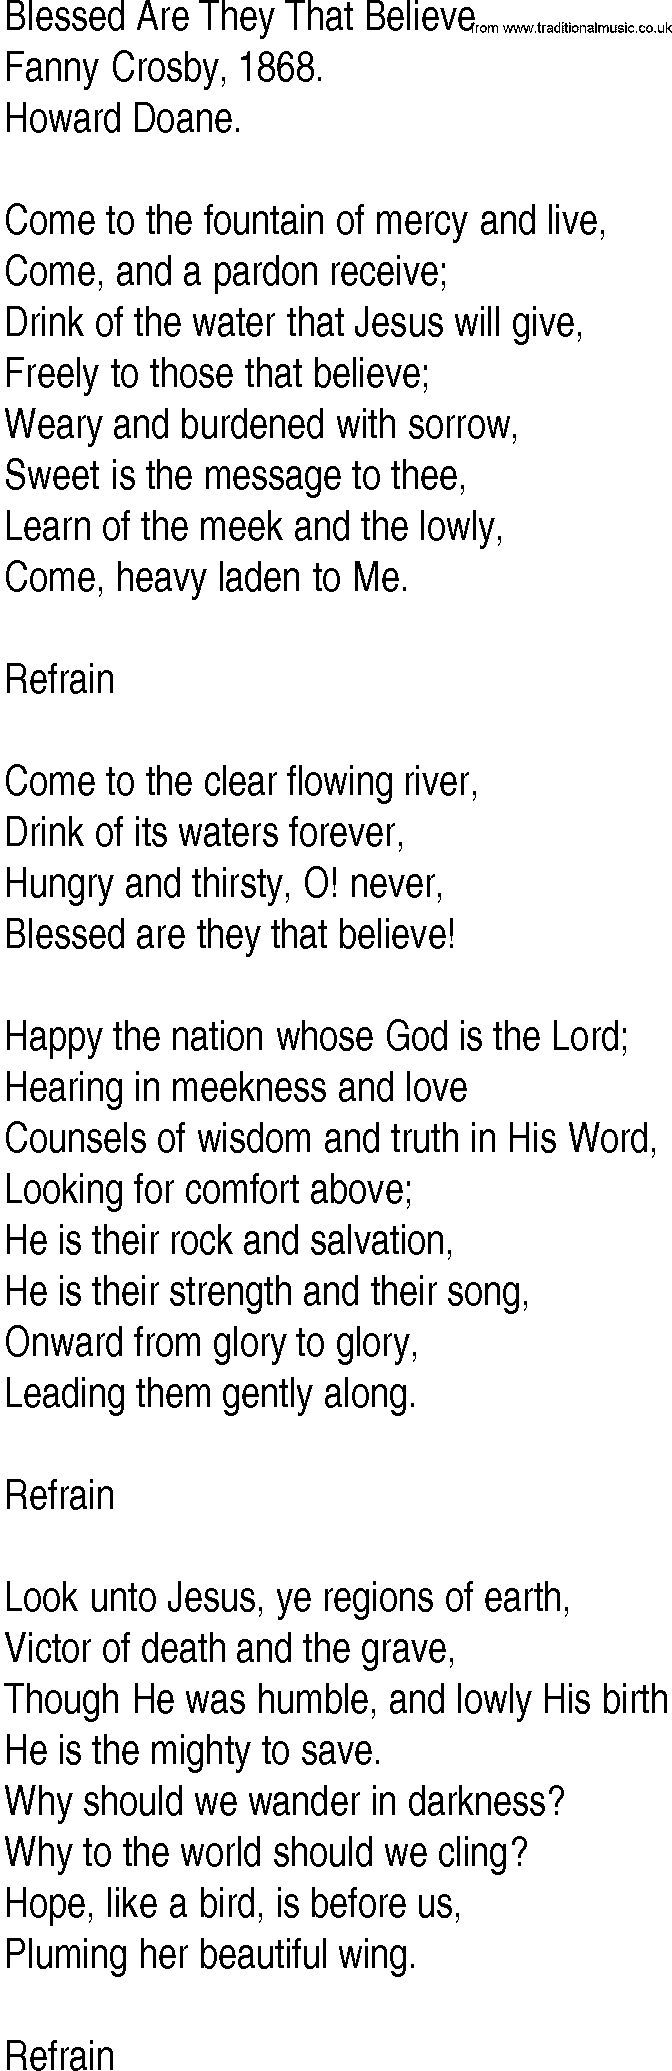 Hymn and Gospel Song: Blessed Are They That Believe by Fanny Crosby lyrics